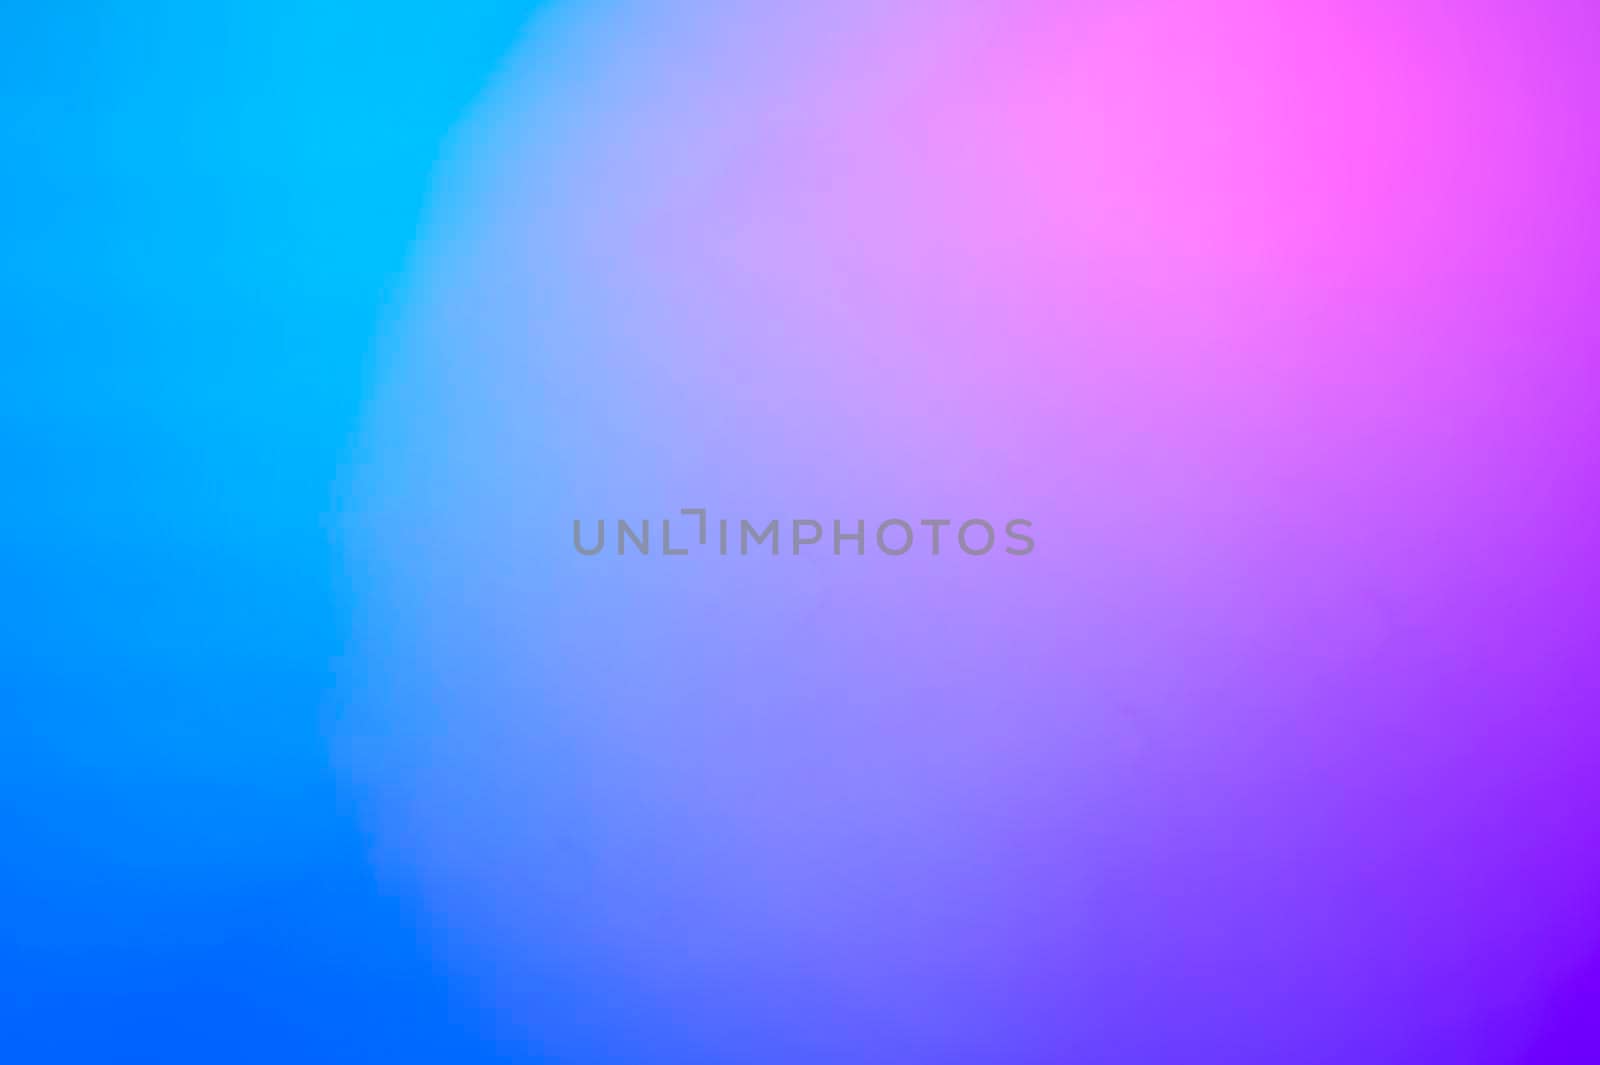 Gradient colorful blue pink modern abstract background. Gradation blurred with modern. For the presentation background.